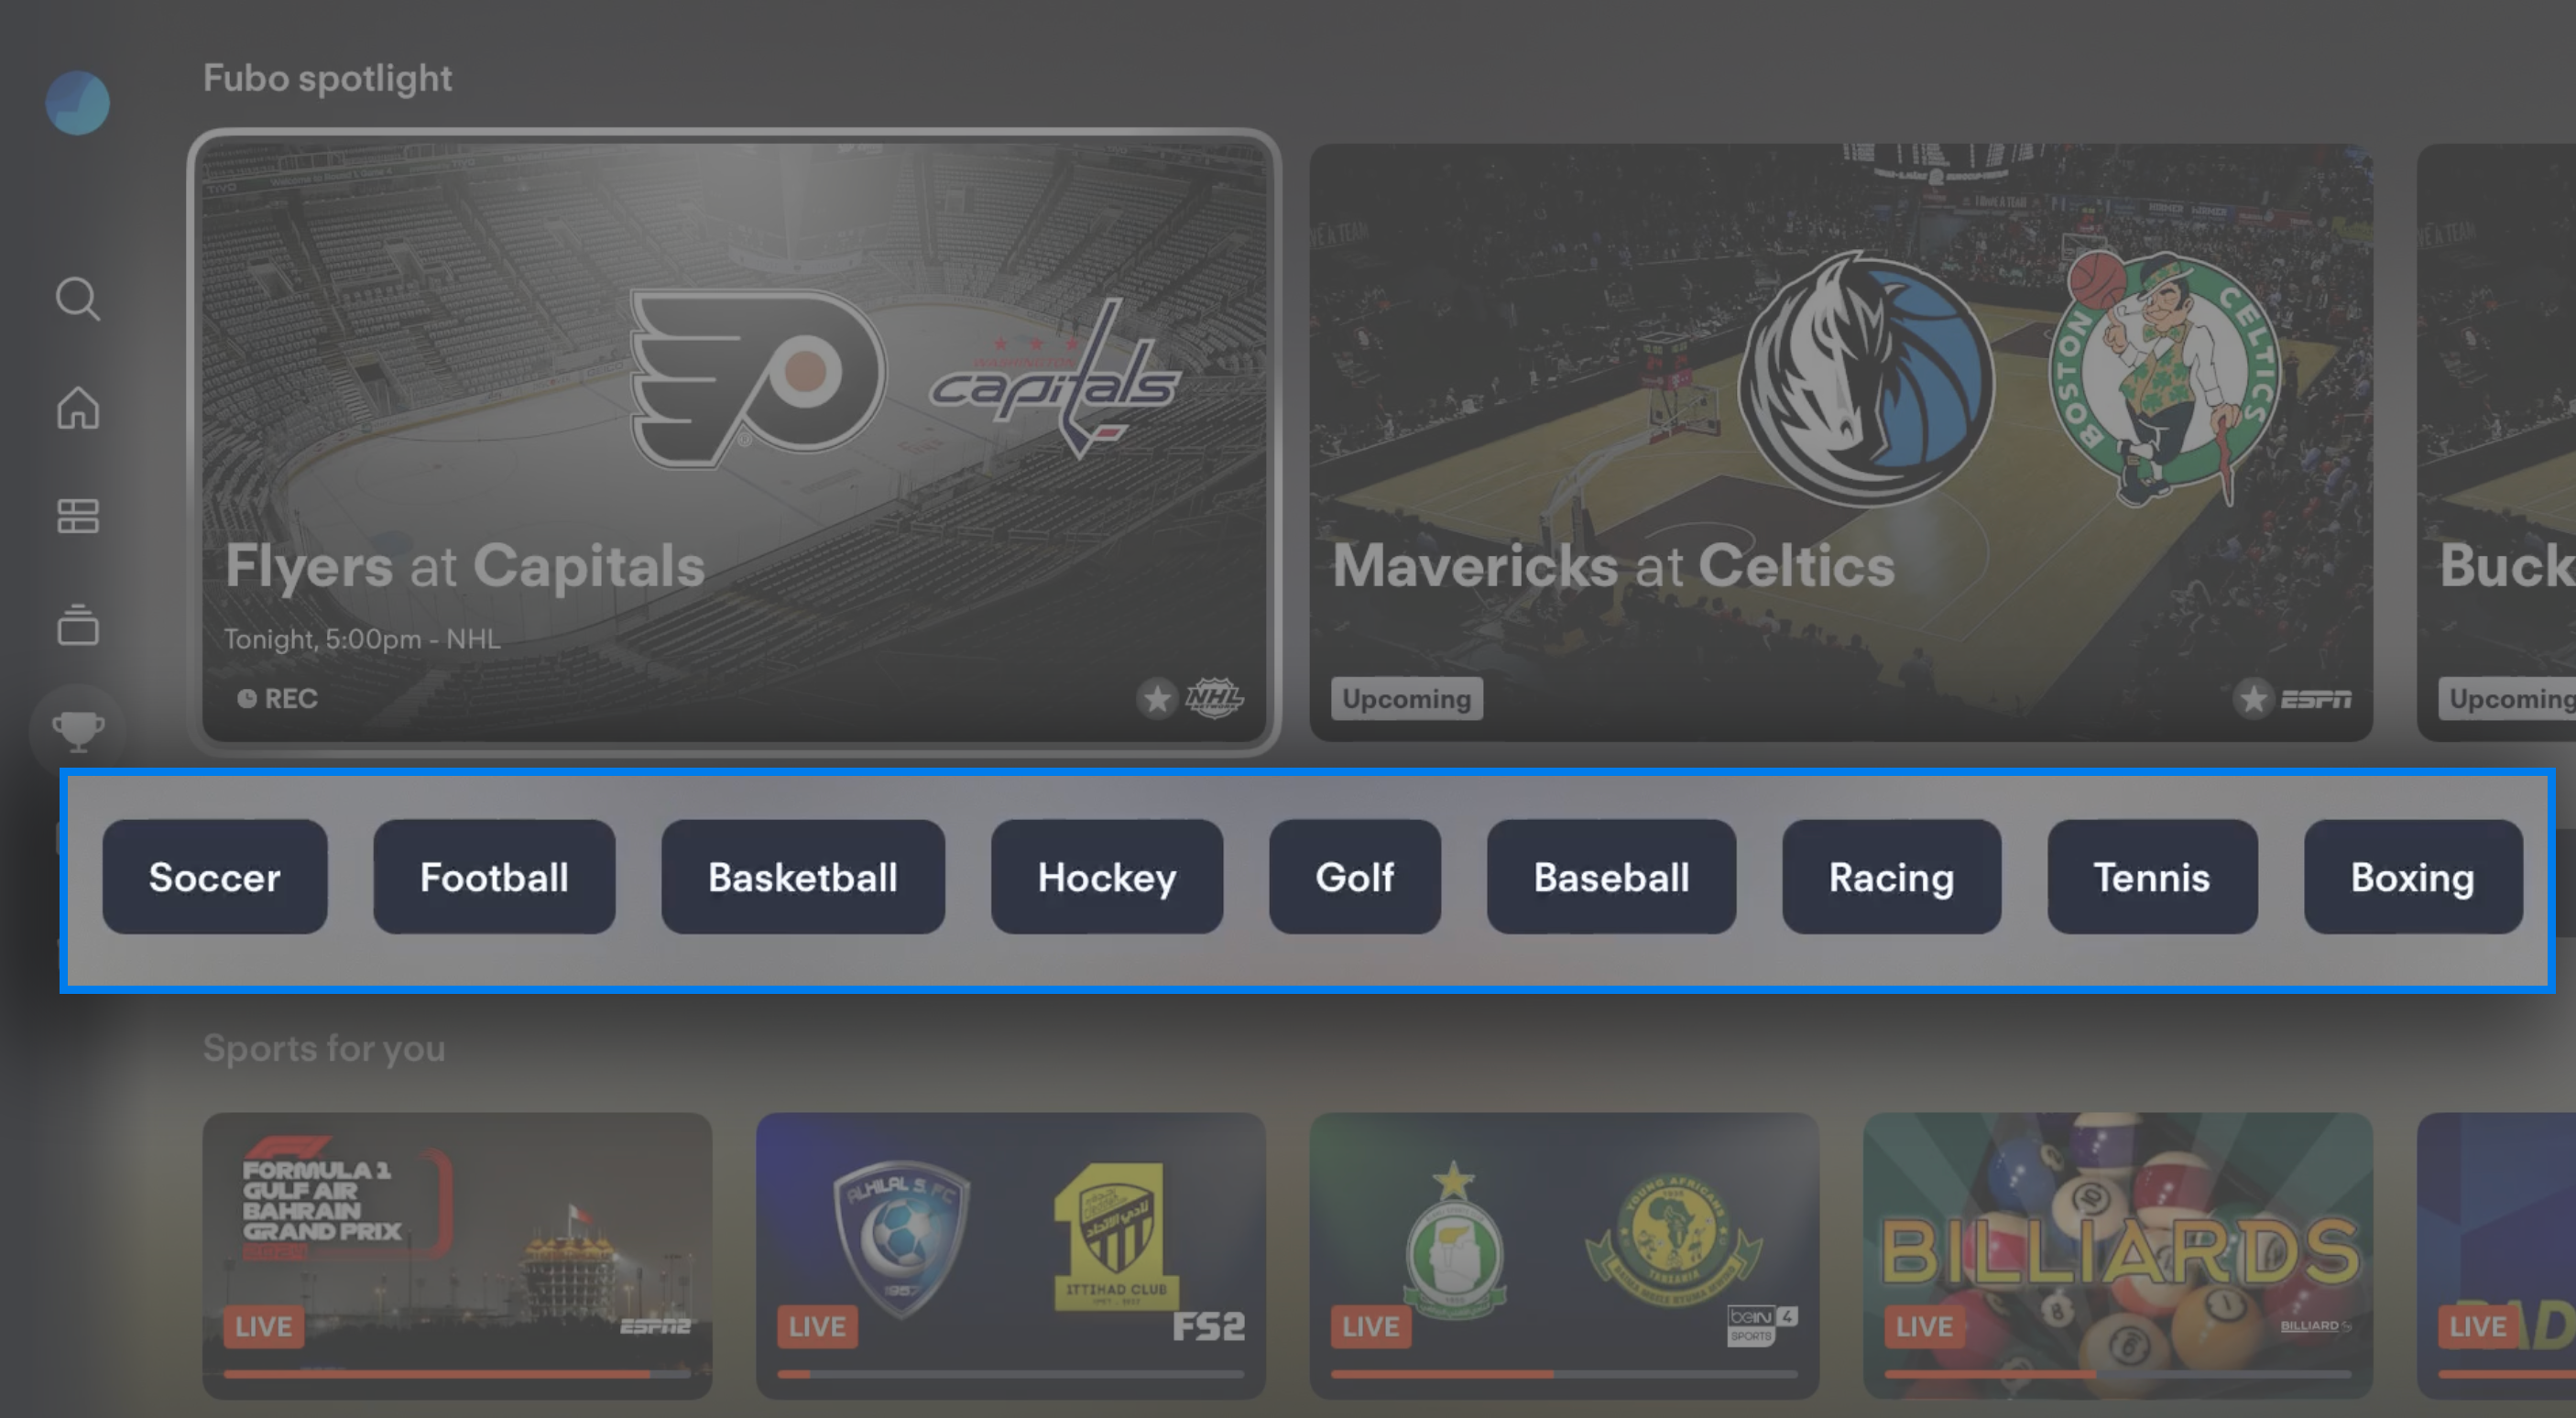 Sports screen of the Fubo app on tvOS; select a sport to view programming